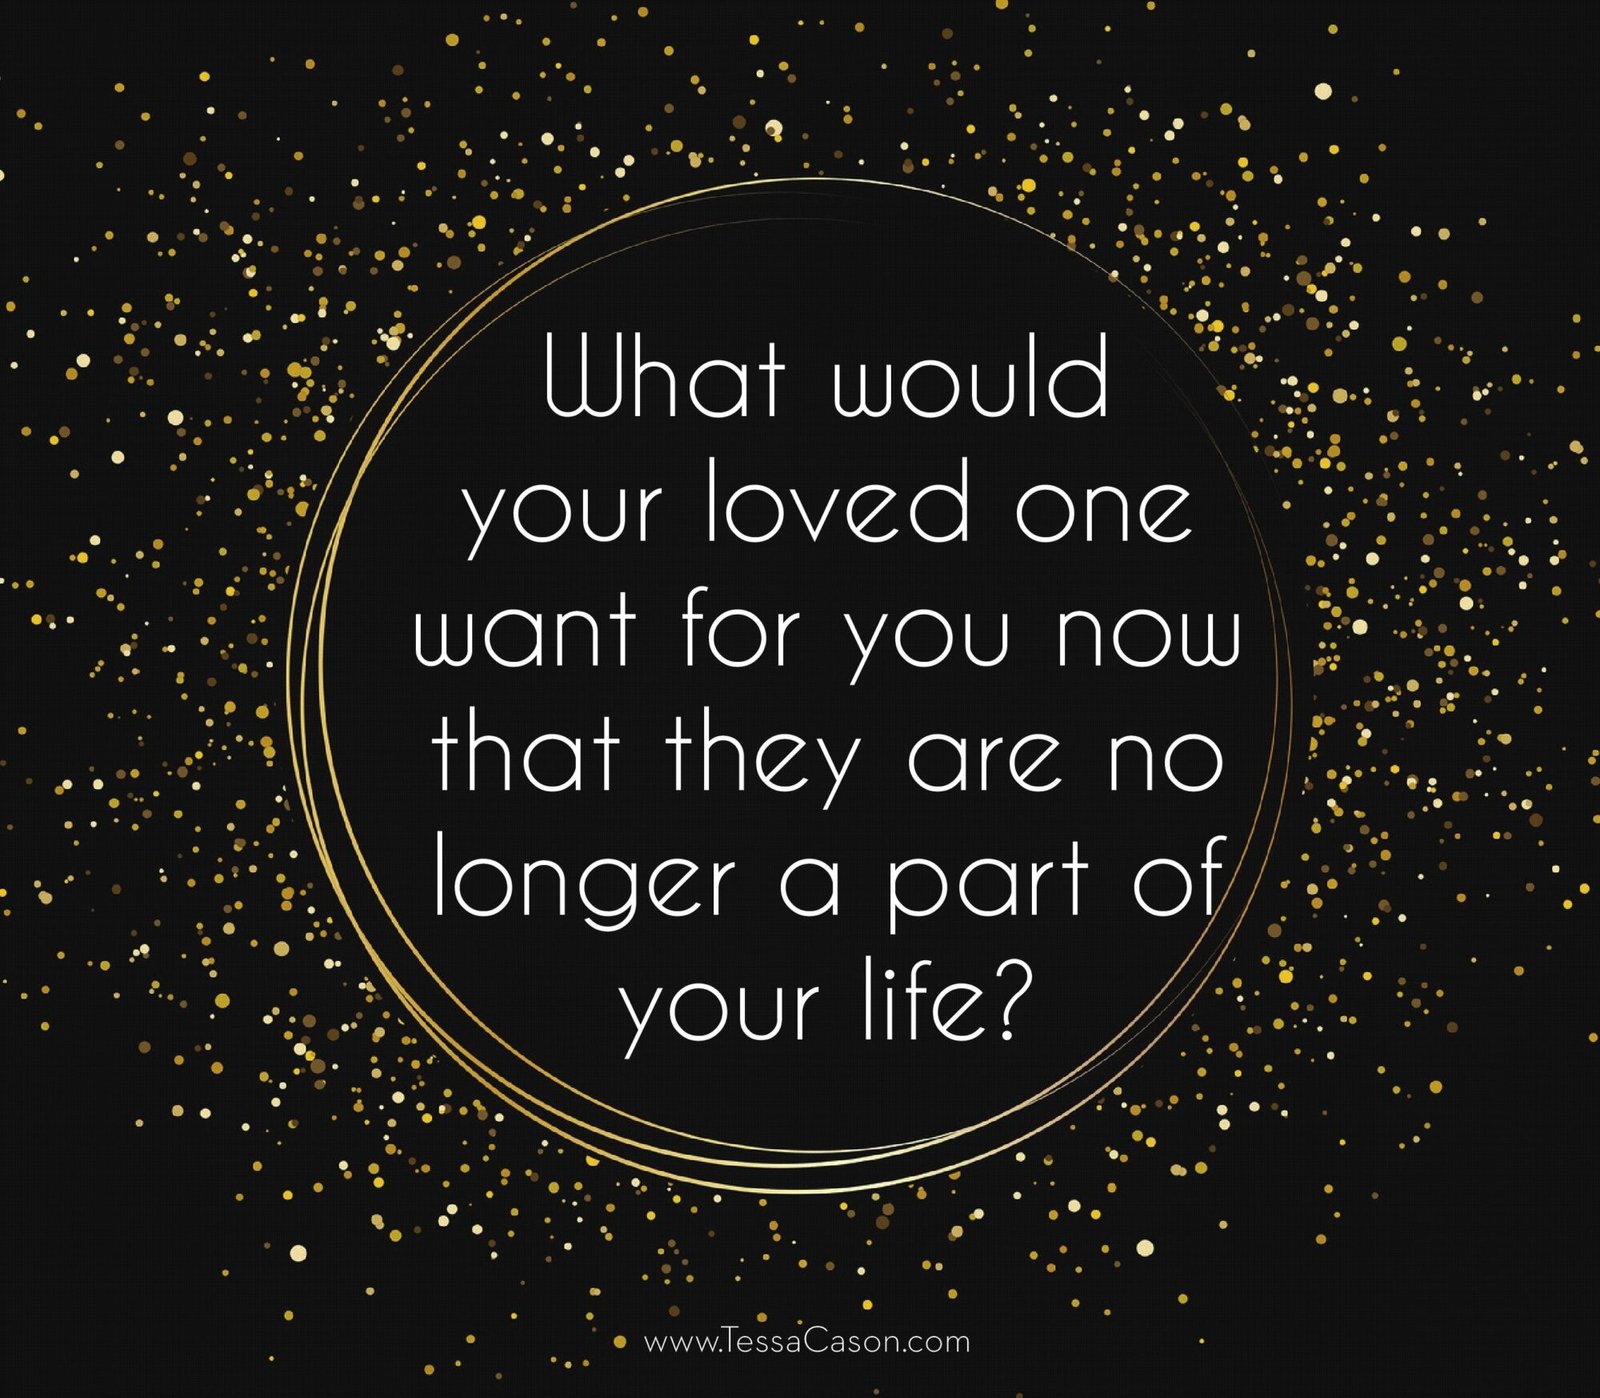 What would your loved on want for you now